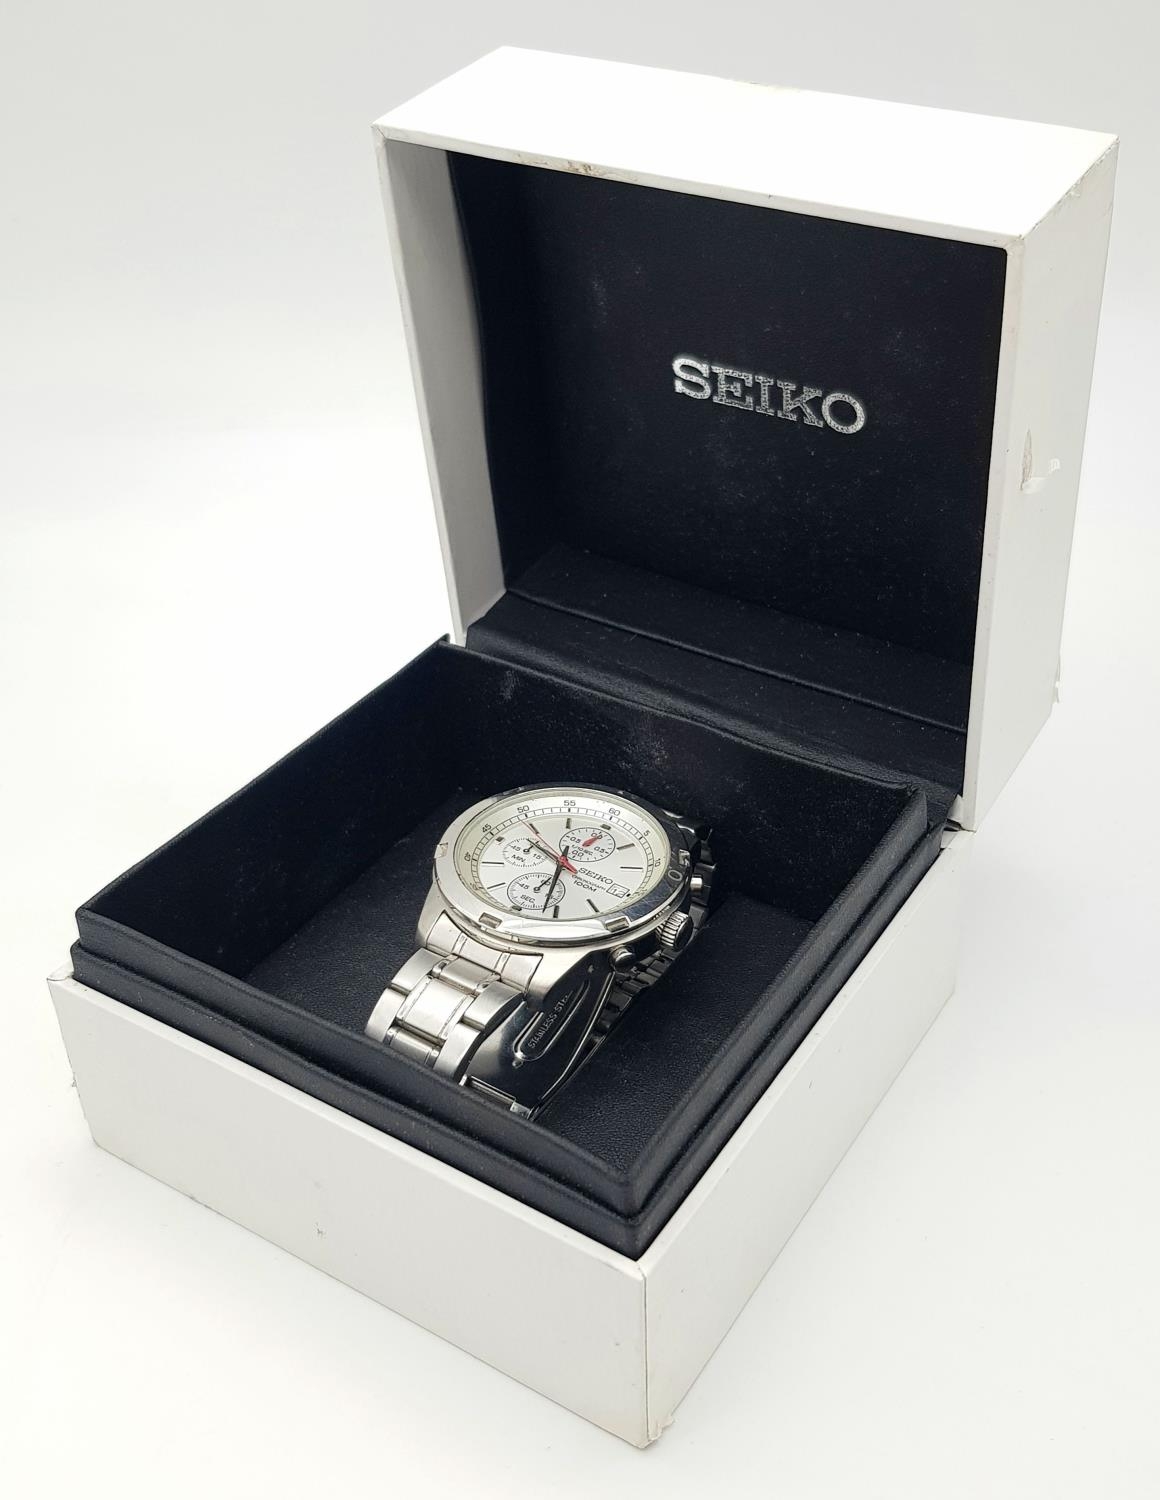 A Seiko 5 Chronograph Quartz Gents Watch. Stainless steel bracelet and case - 43mm. White dial - Image 6 of 6